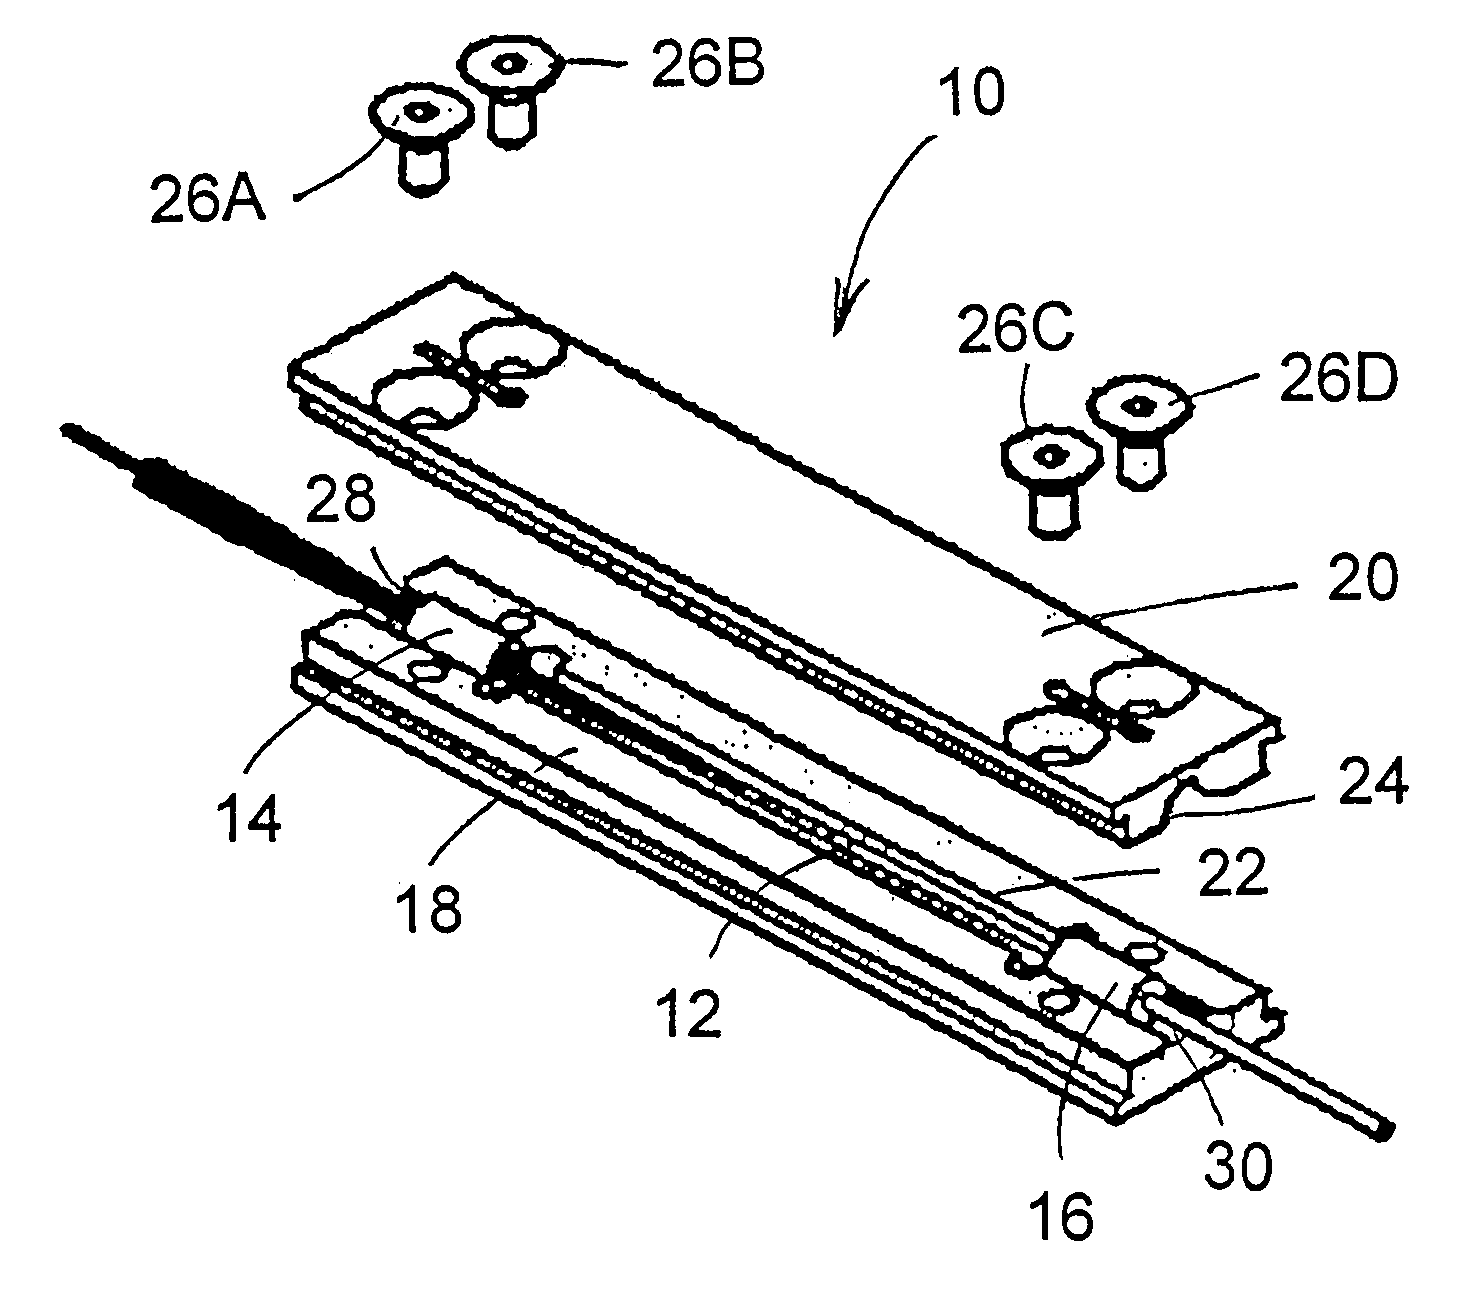 Optical fiber component package for high power dissipation